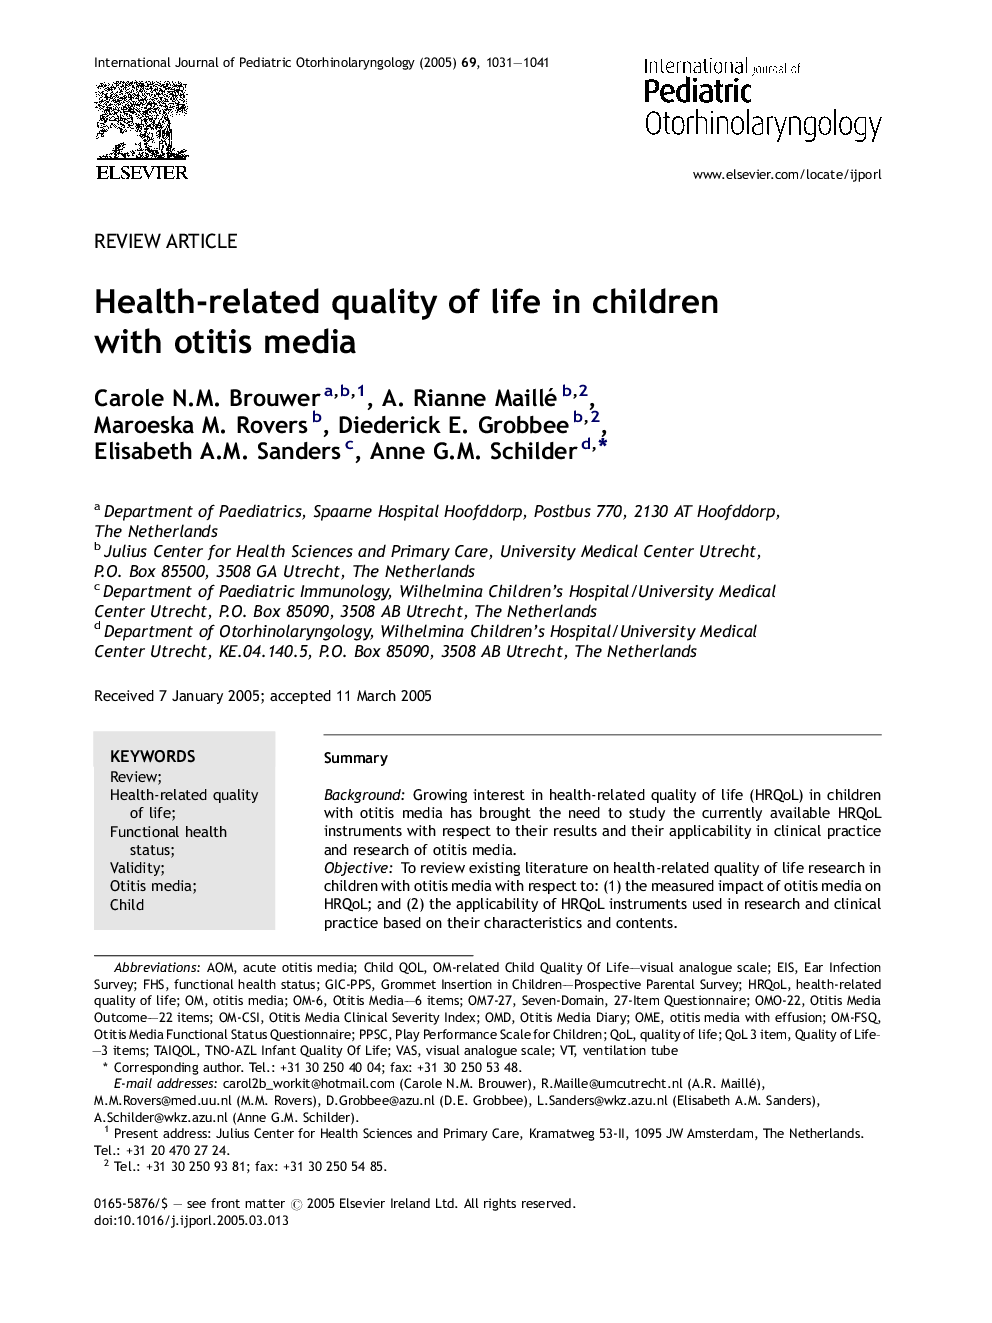 Health-related quality of life in children with otitis media